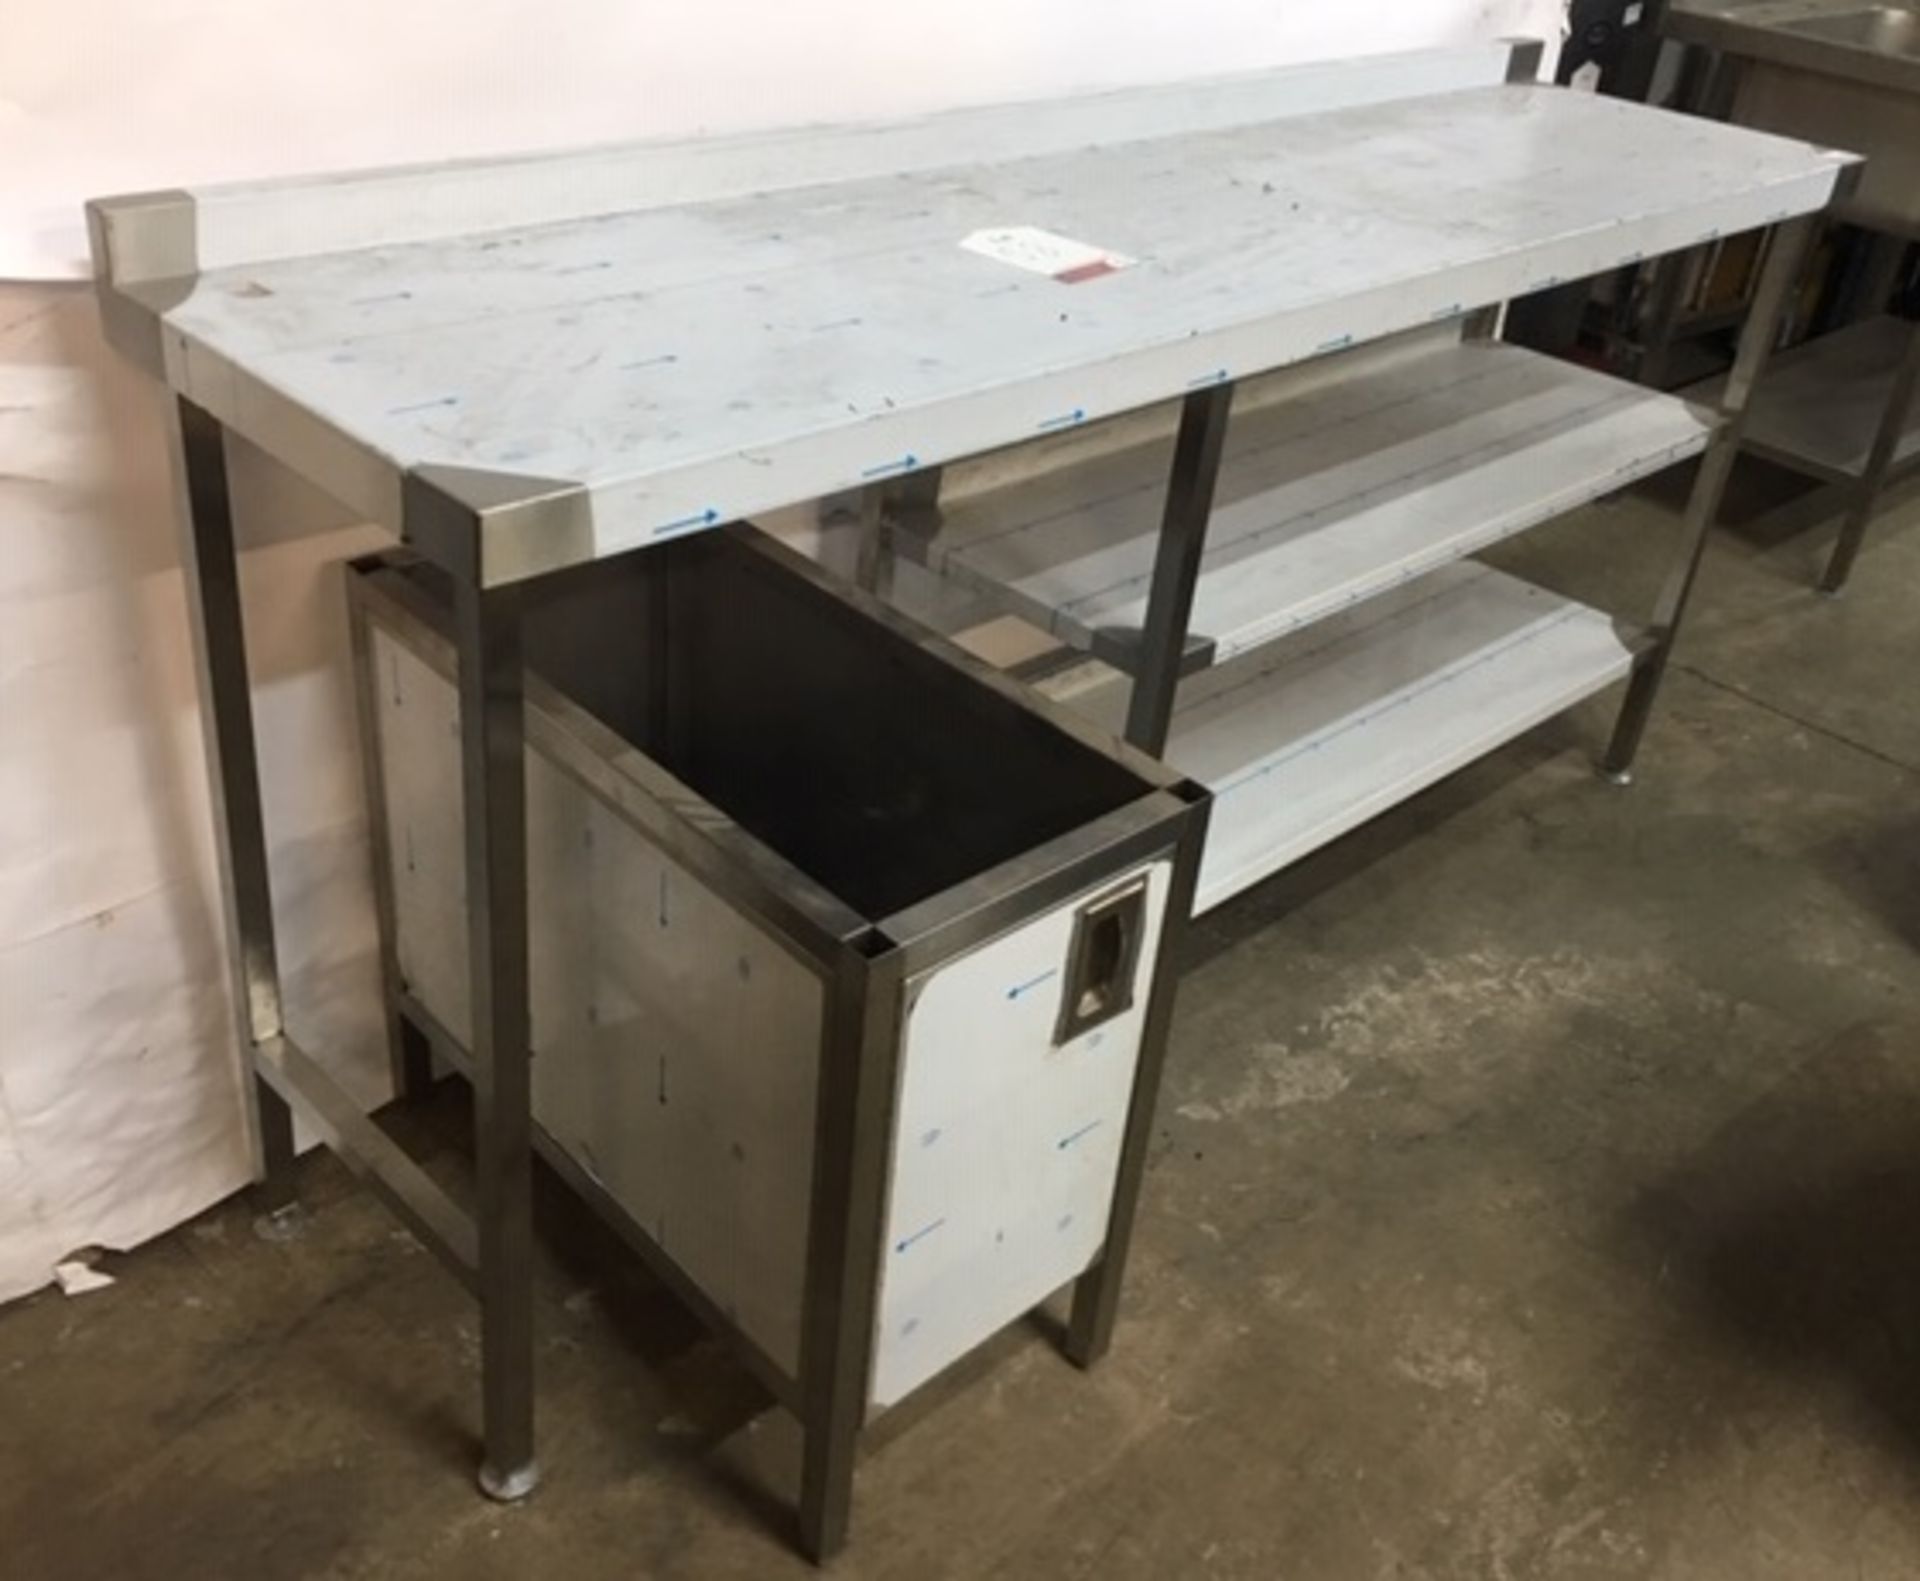 Stainless Steel Preparation Table W/ 2 x Undershelves - Image 3 of 4